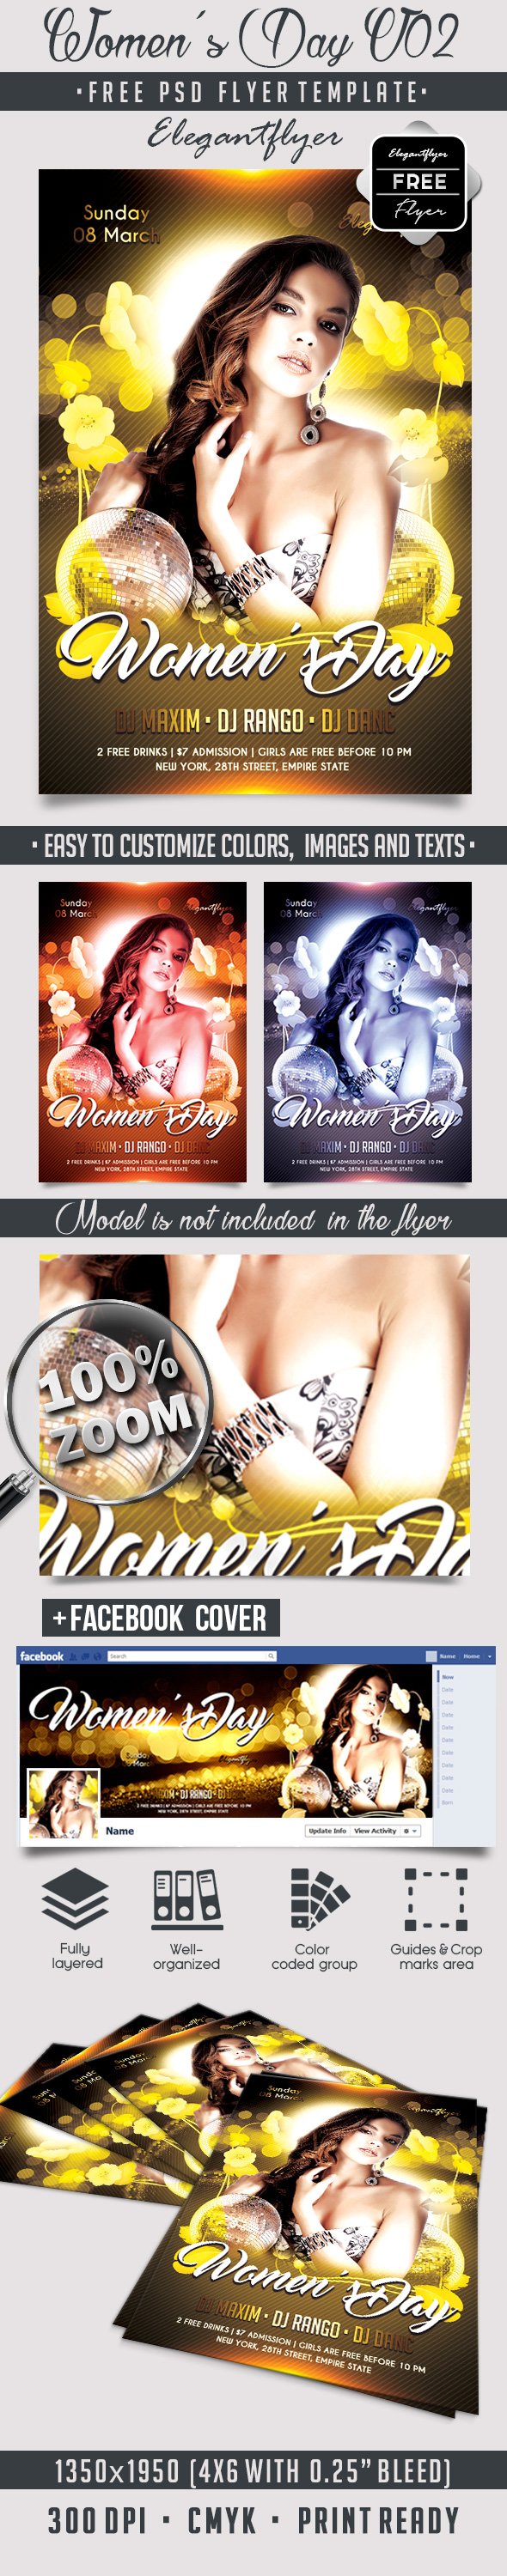 Women's Day Flyer Template Free